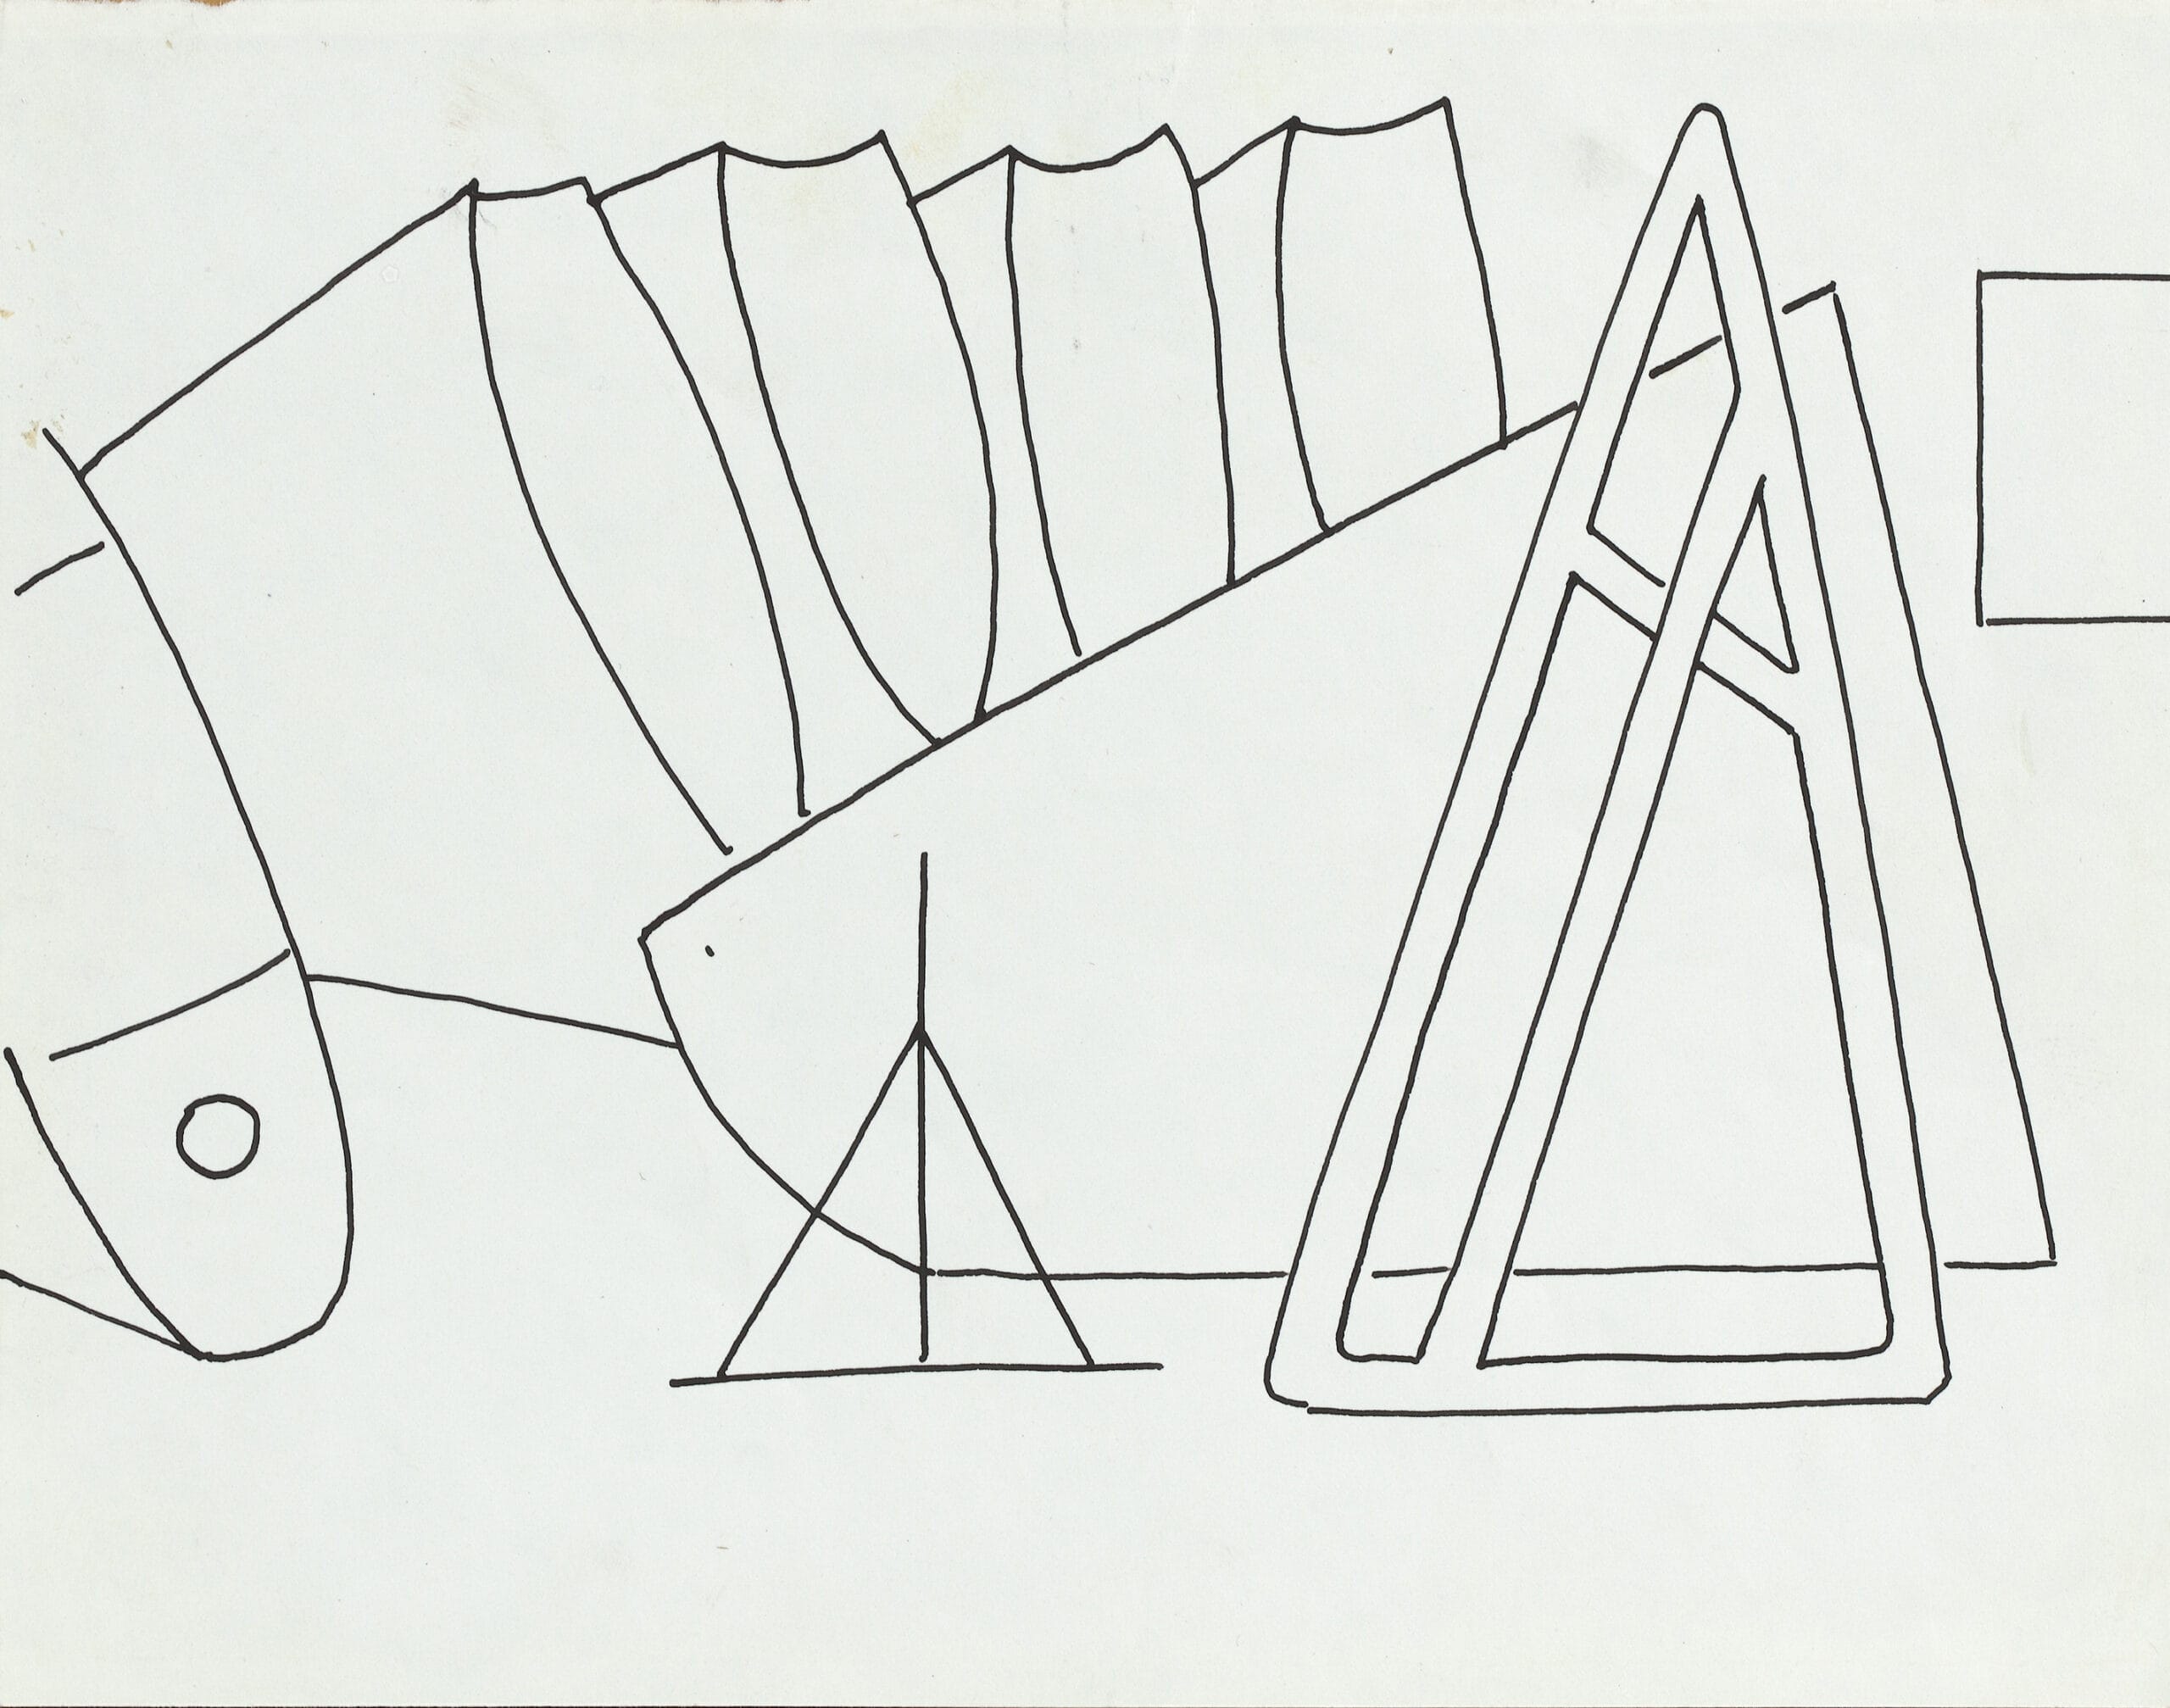 Abstracted line drawing of an aircraft factory with curved shapes floating in space and a triangular shape at the center.